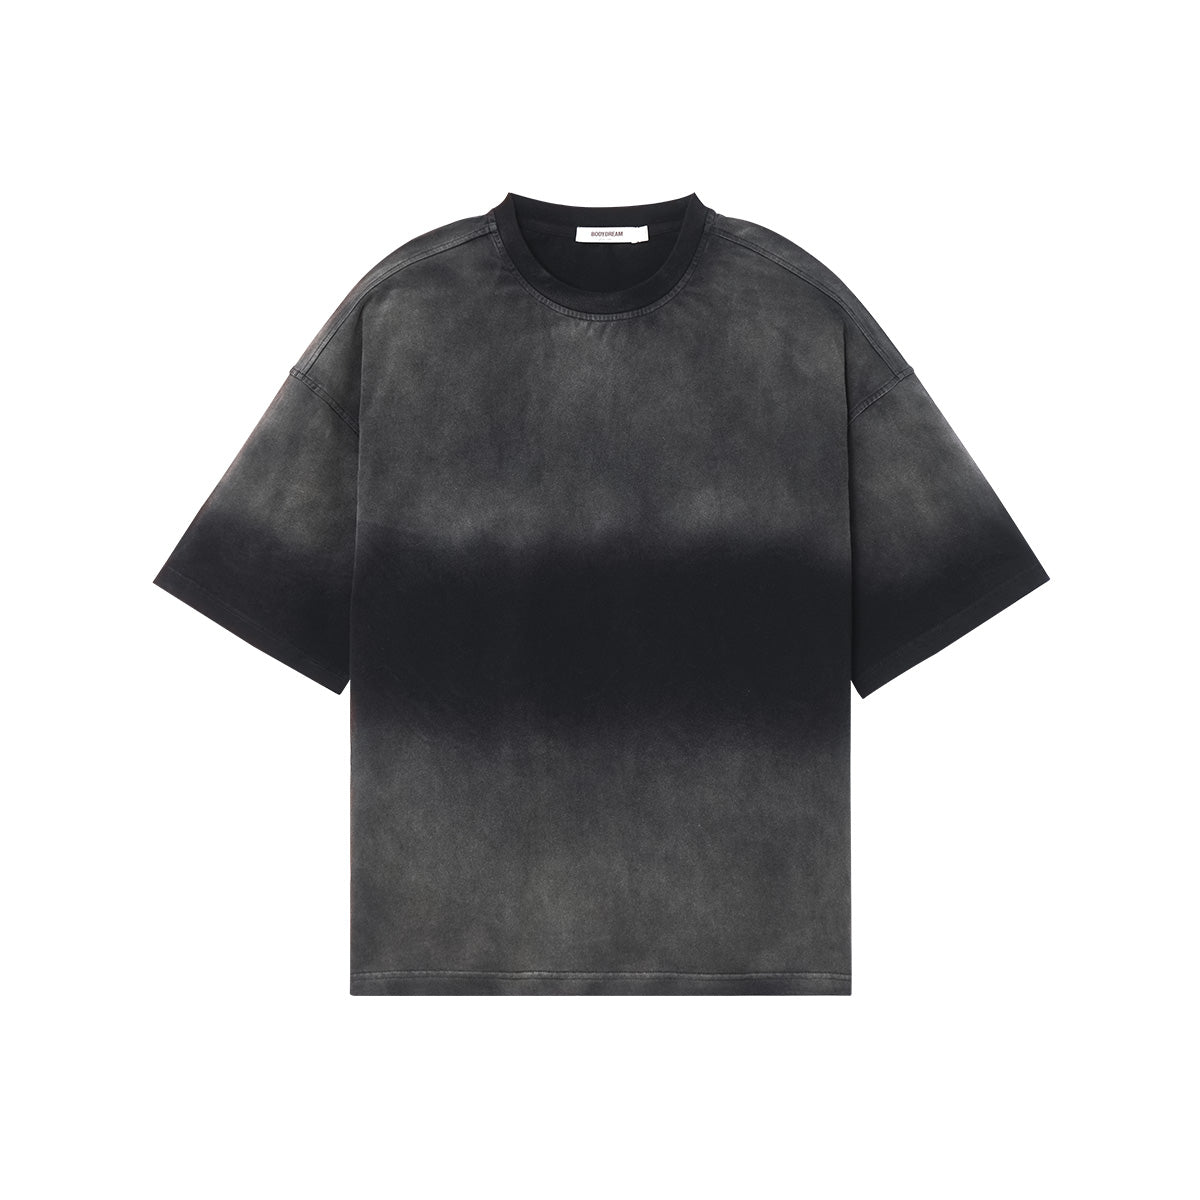 Distressed-effect Gradient Oversized Charcoal Tee - 0cm